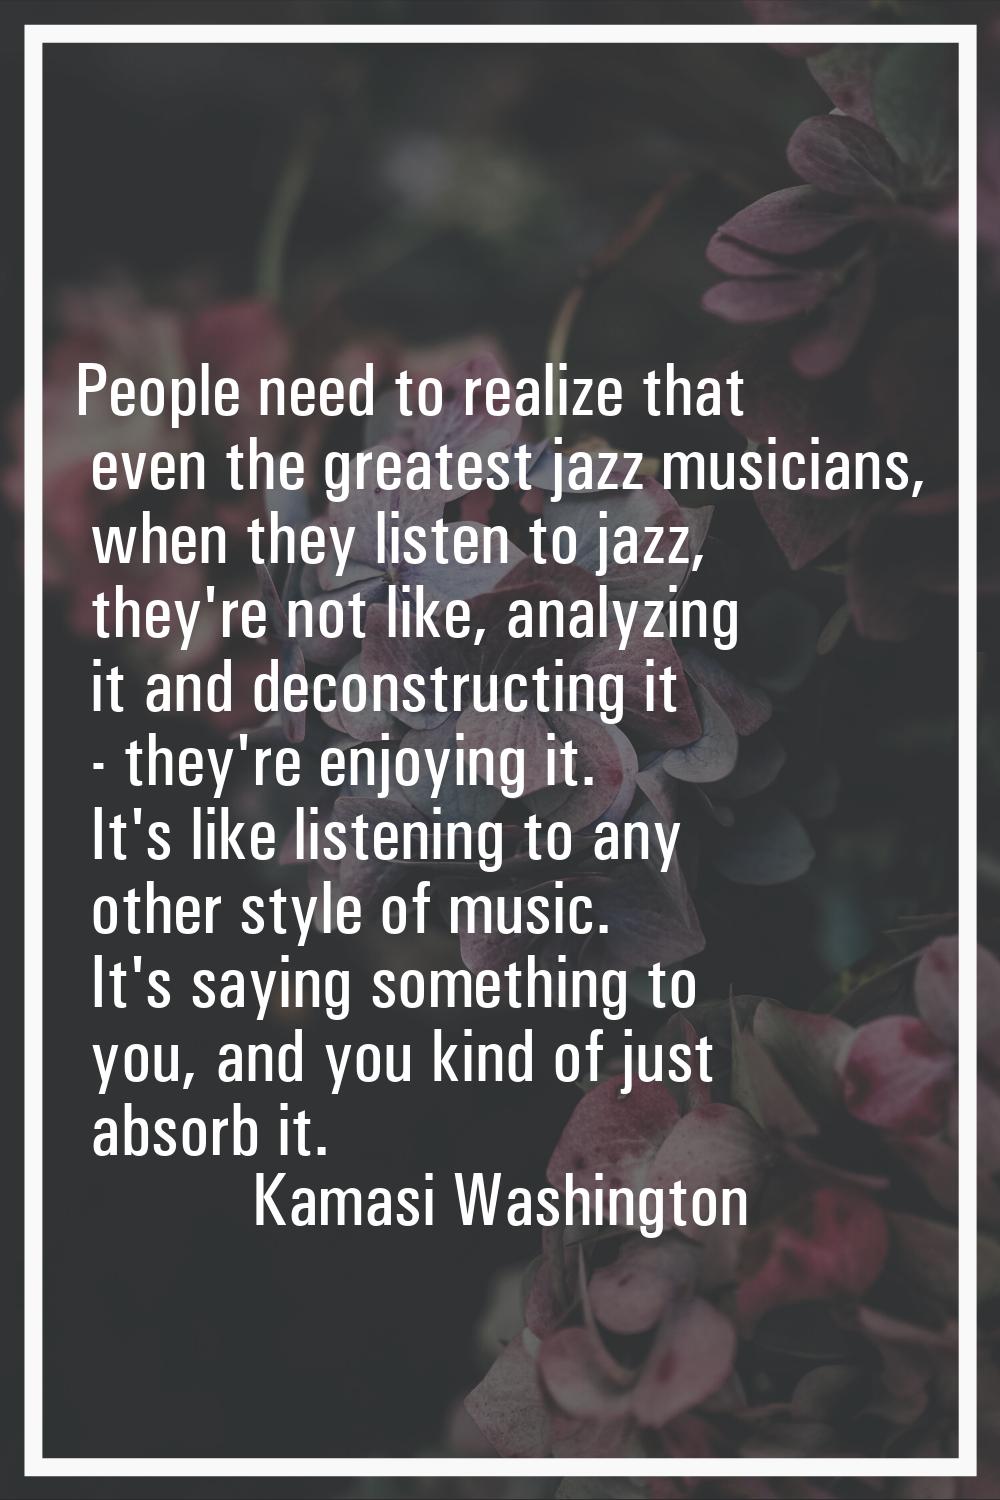 People need to realize that even the greatest jazz musicians, when they listen to jazz, they're not